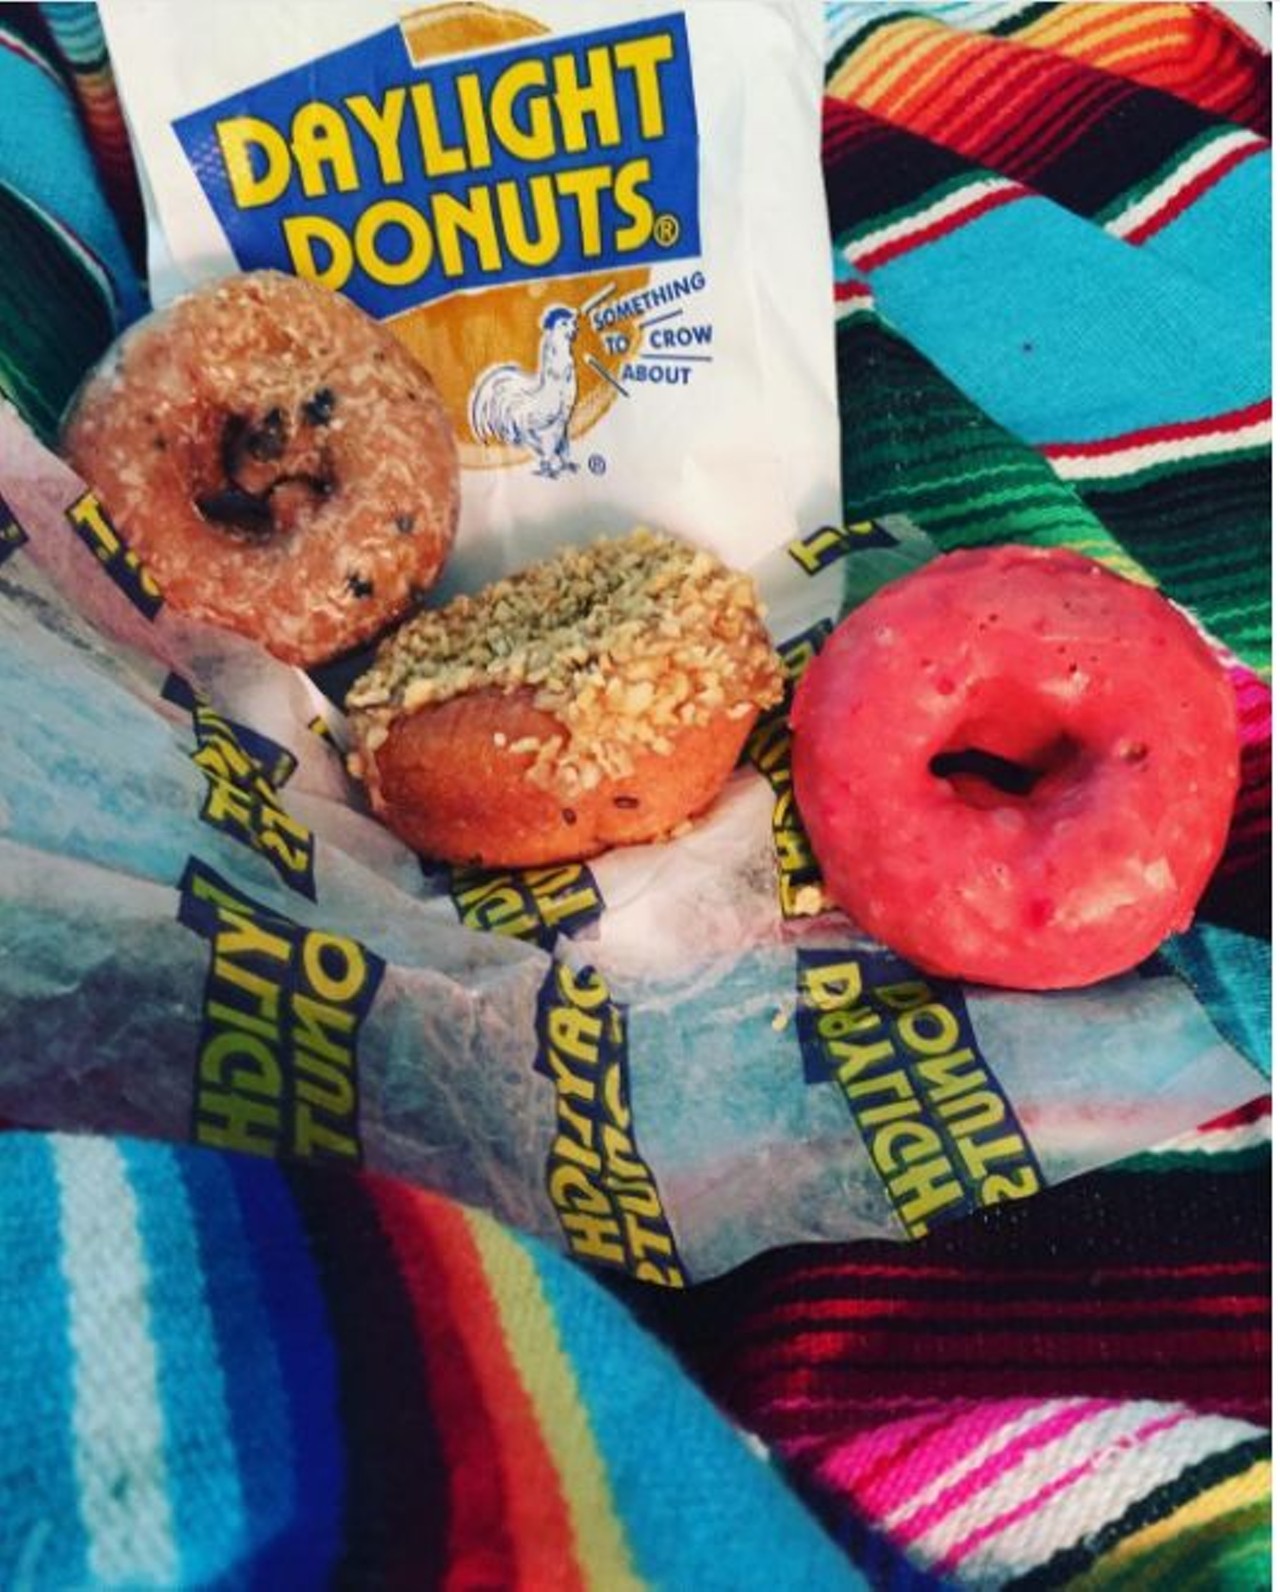 Daylight Donuts
9517 Fredericksburg Road, (210) 696-7979
Fuel up on morning coffee and doughnuts with Daylights wide variety. And if sweet pastries aren't your morning go-to, chow down on one Daylight Donuts' kolaches.
Photo via Instagram, champagnelindsay